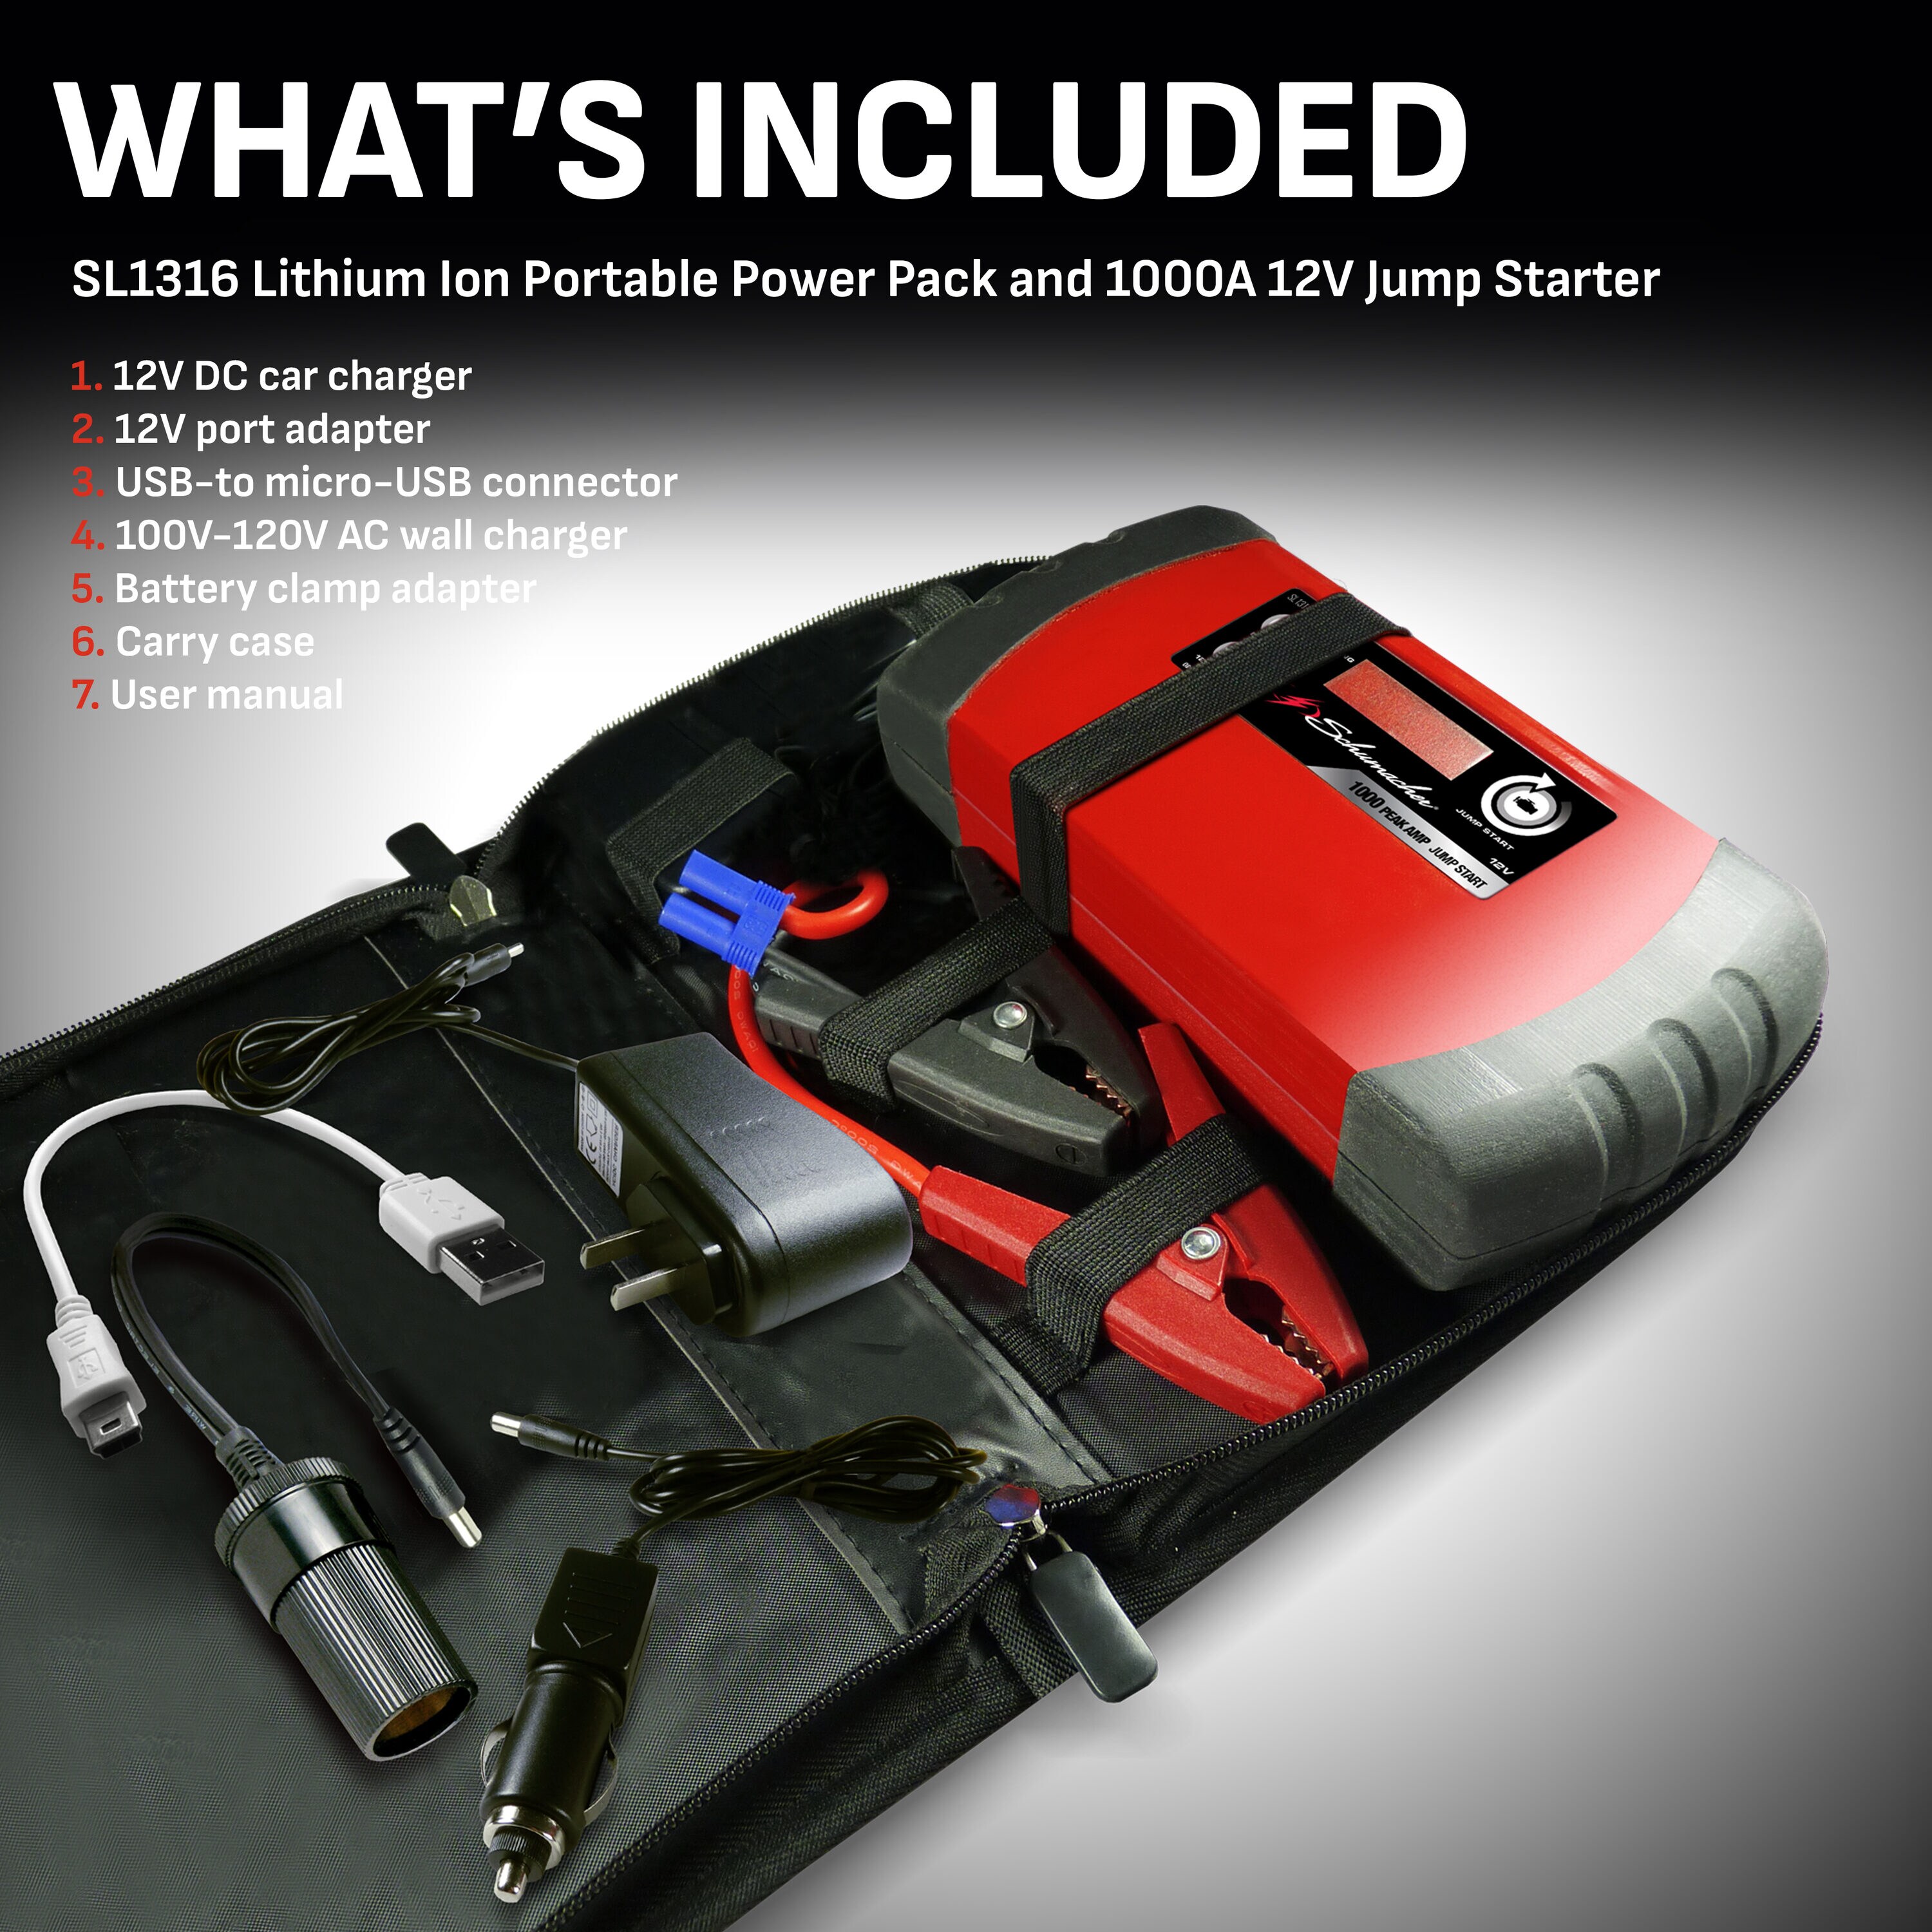 1000 Peak Amp Lithium-Ion Jump Starter and Power Bank